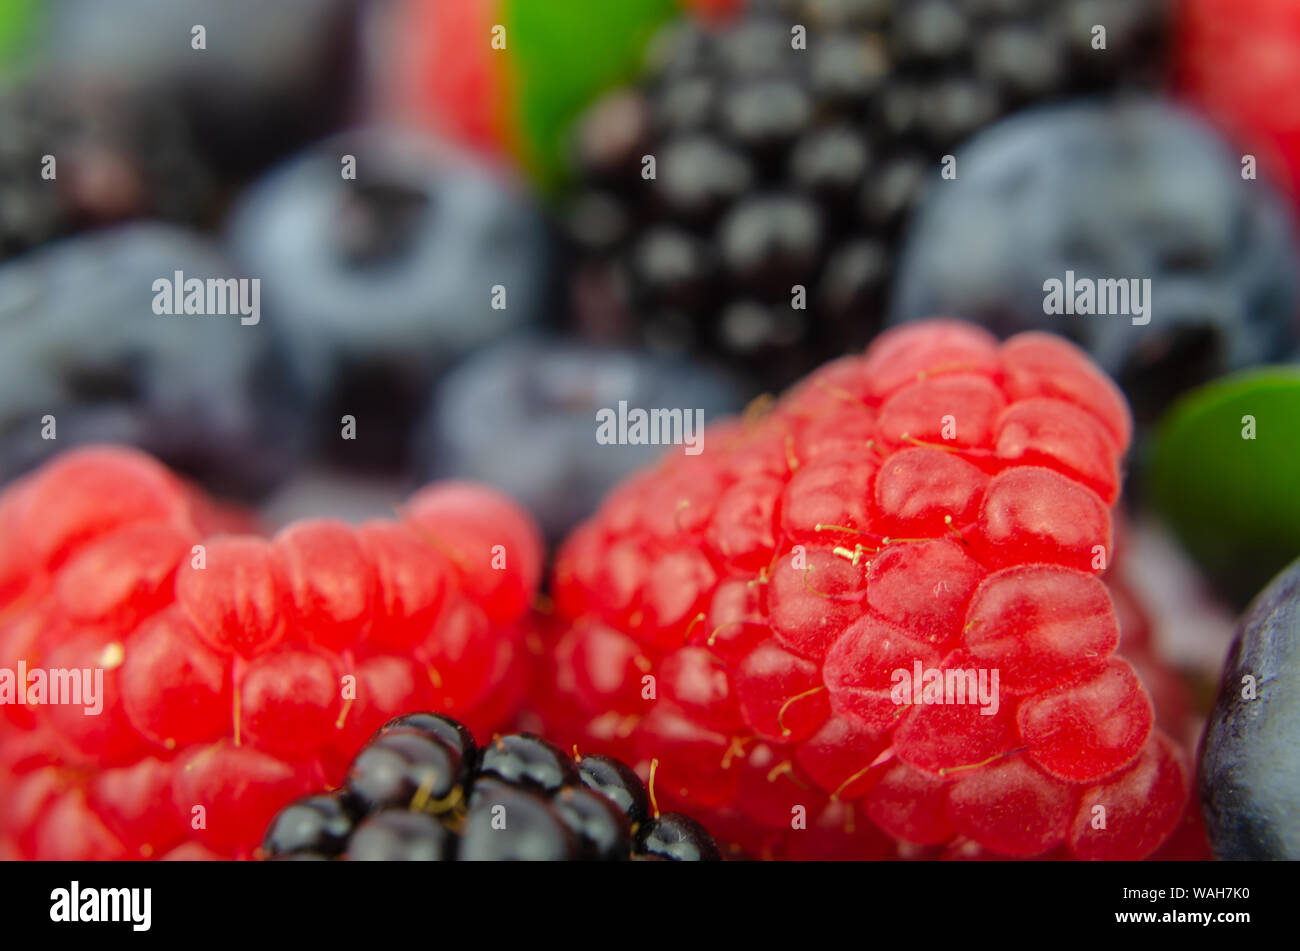 Mix of juicy berries: Raspberry, Blueberry and Blackberry with tiny green leaves. Macro photo with the main focus on the raspberries. Stock Photo